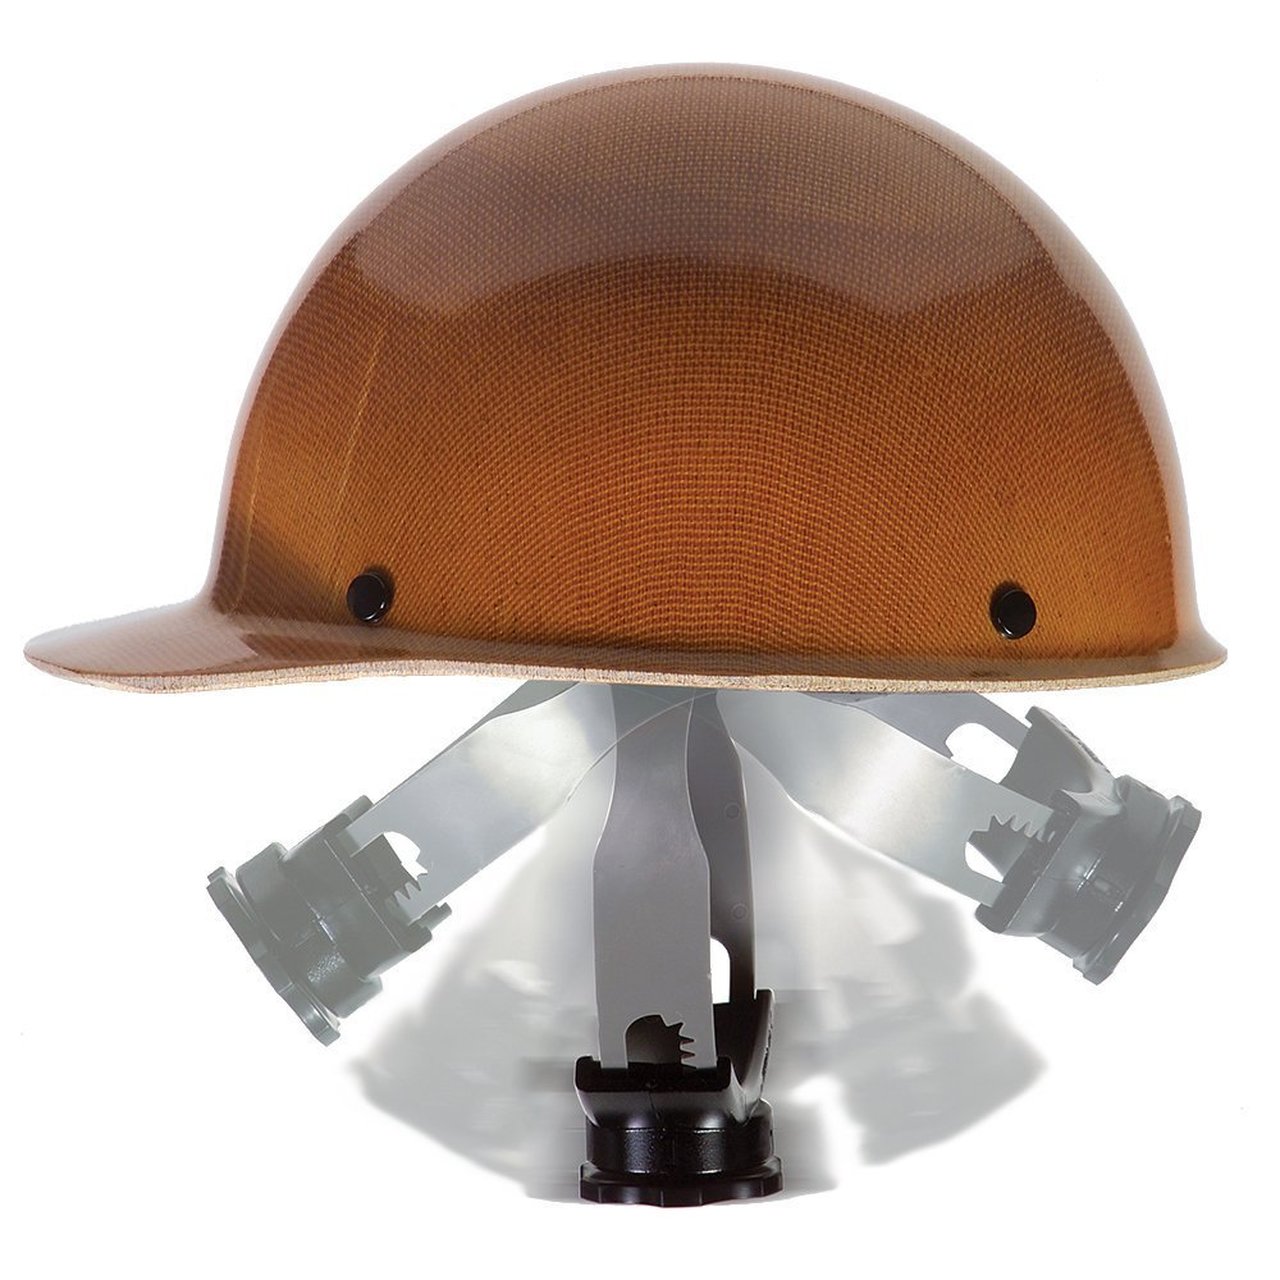 Skull Guard Comfo-Cap Helmet 4Point Replacement Hard Hat Safety Suspension Liner 